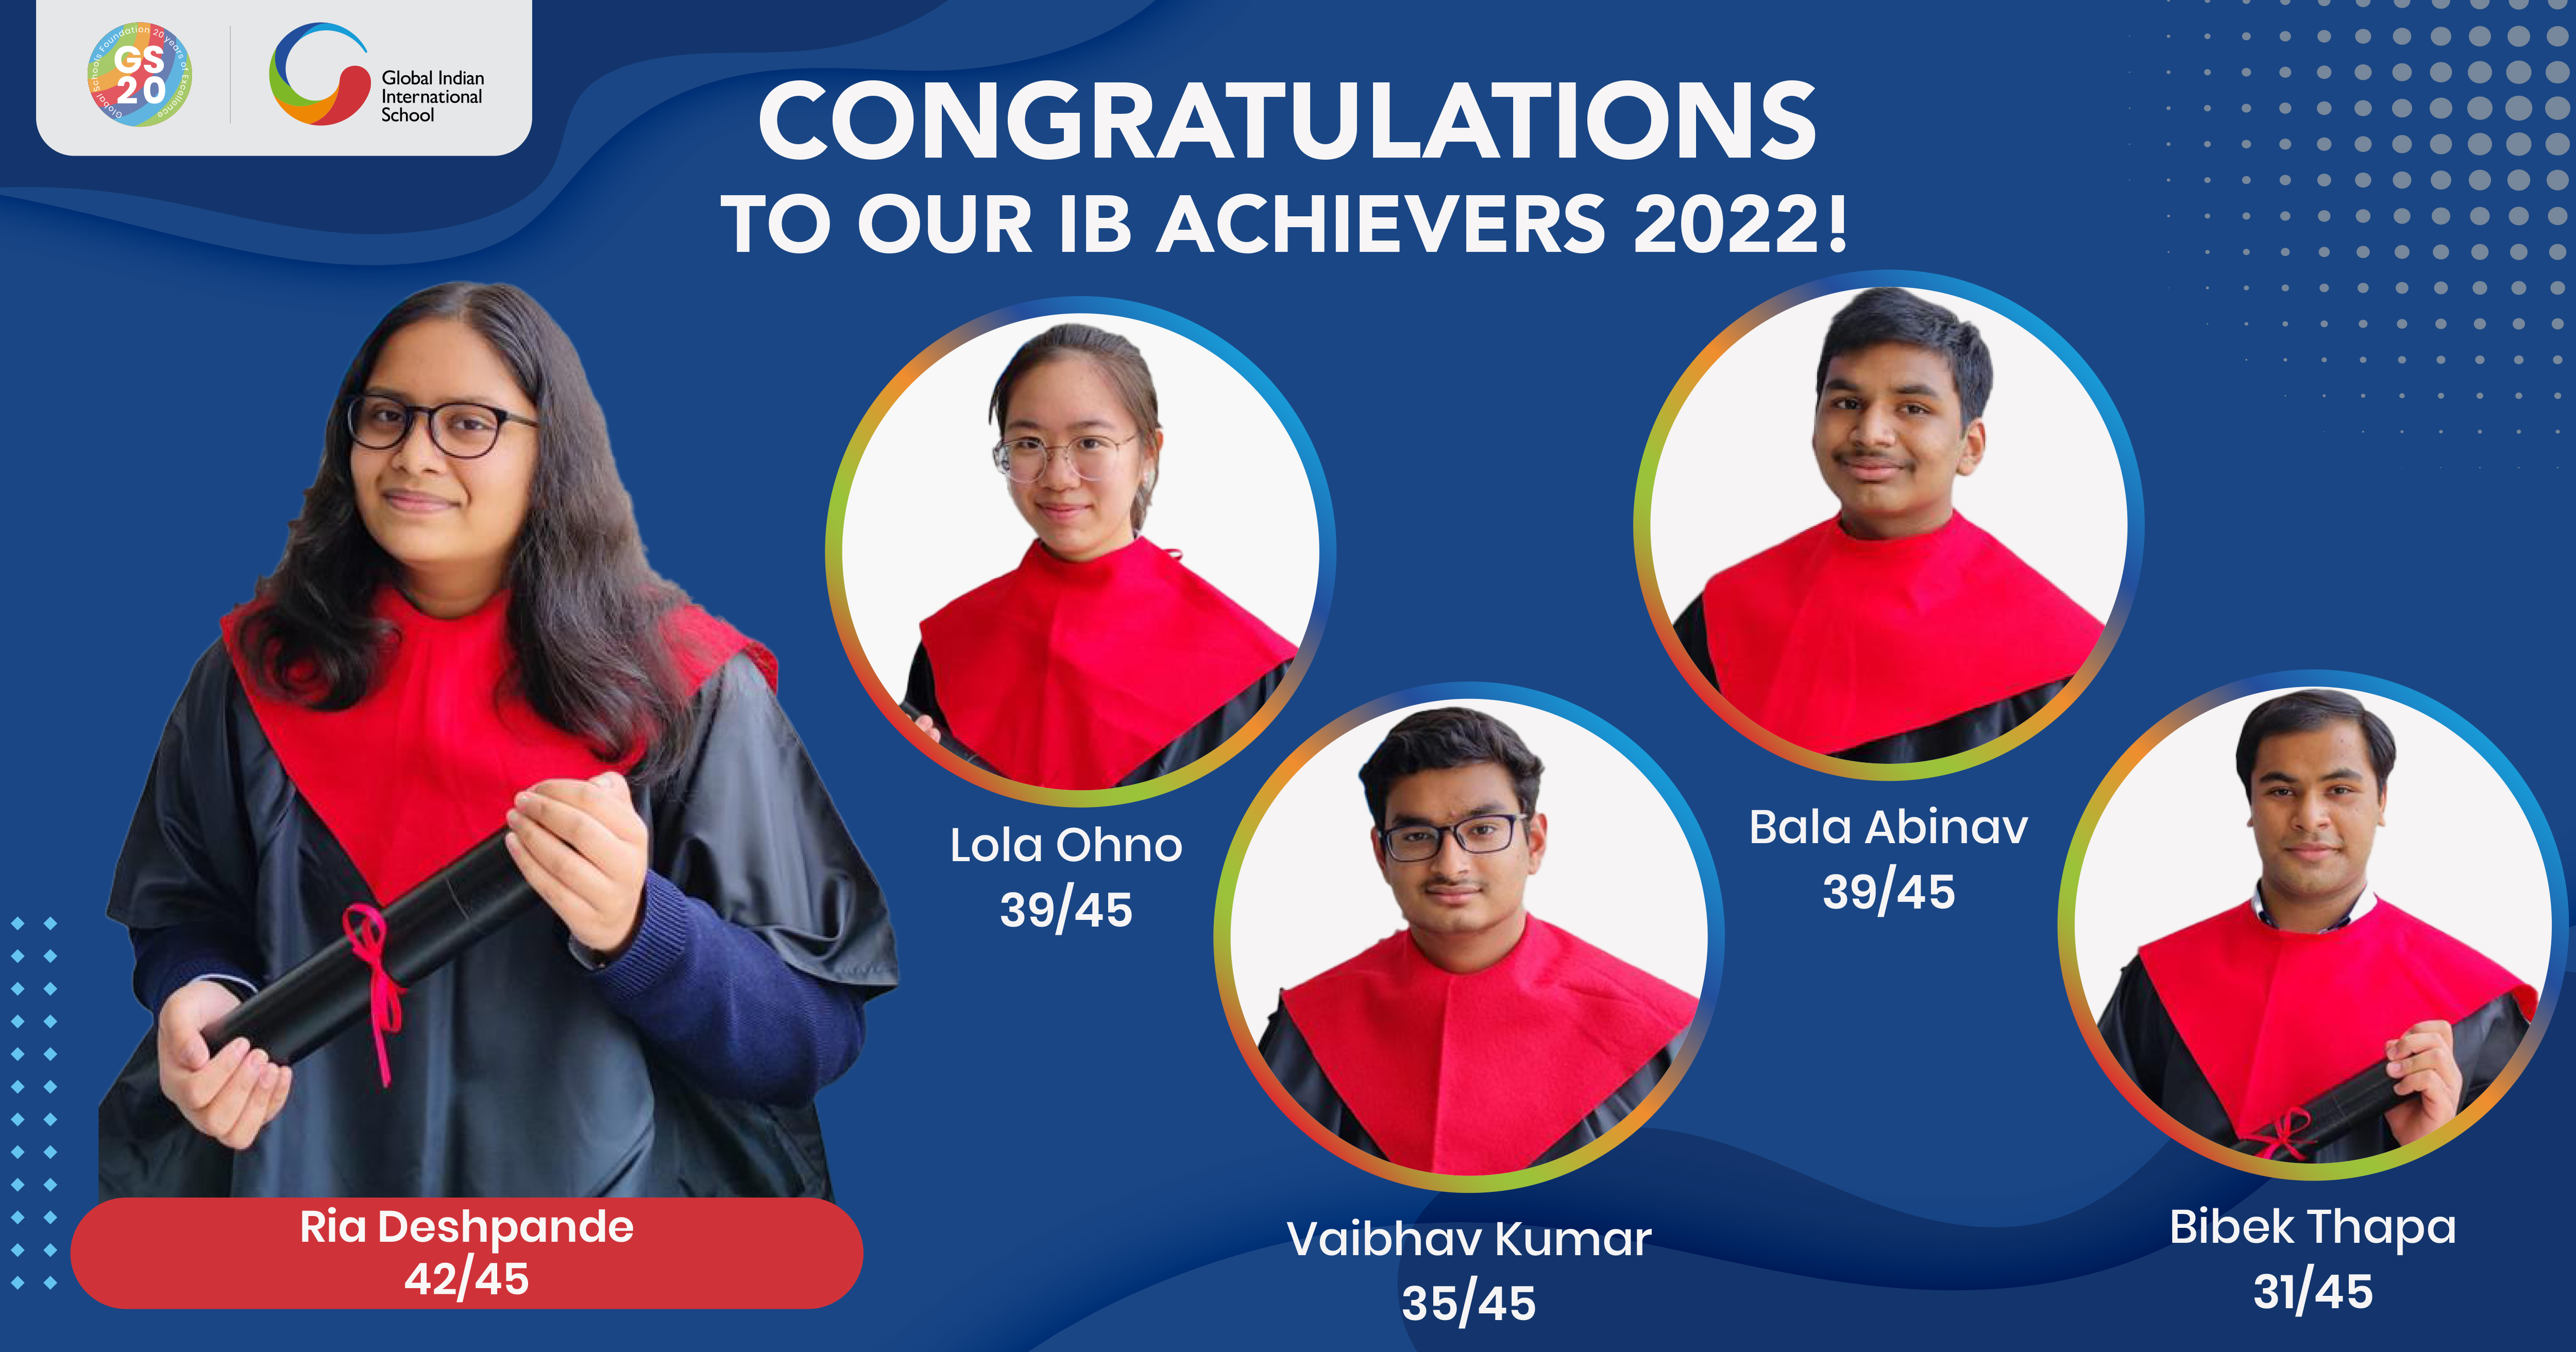 First-ever IBDP cohort at GIIS Tokyo graduated with flying colours